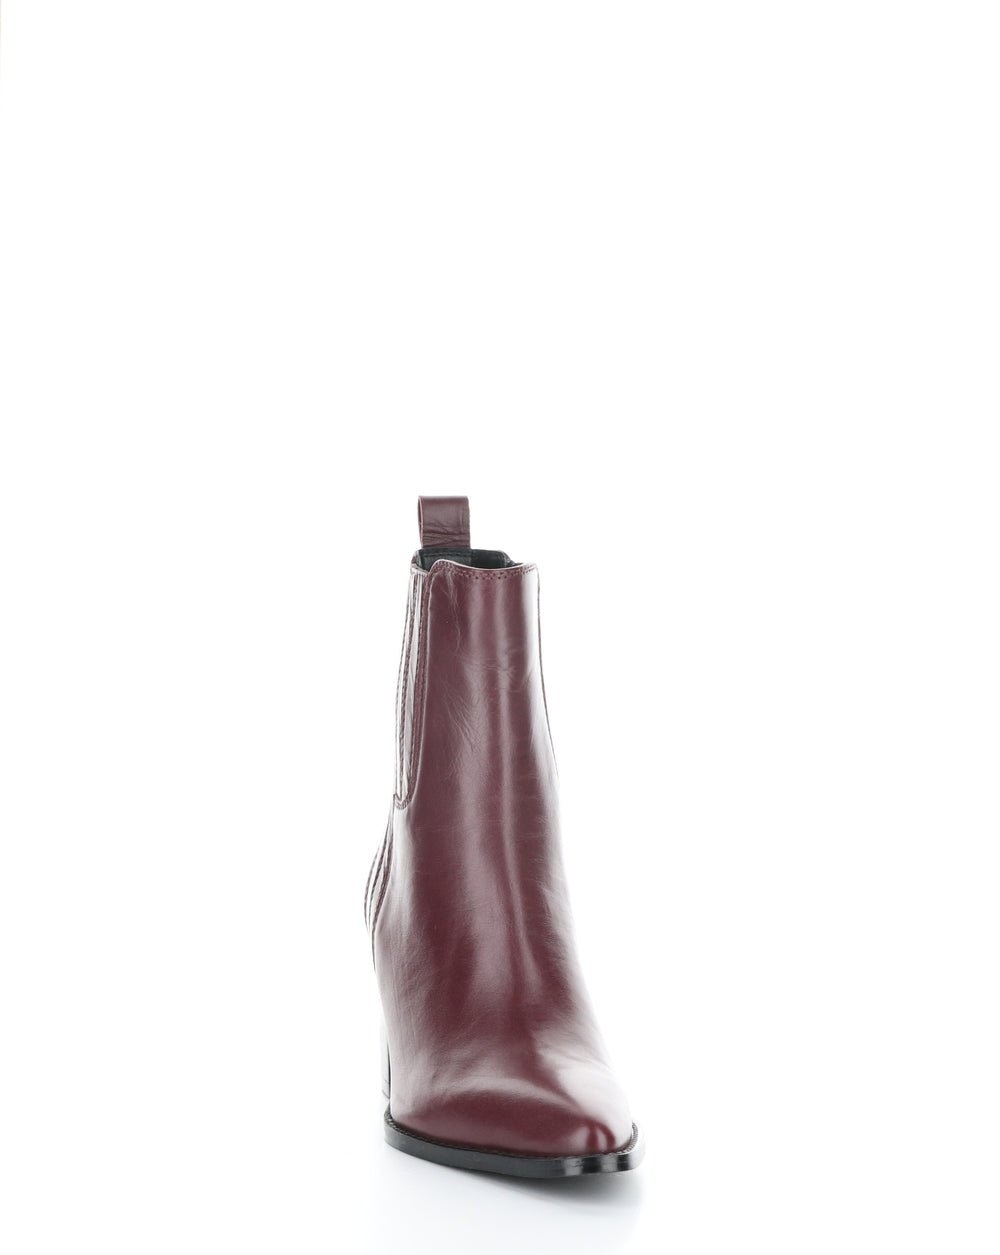 TRULY BORDO Pointed Toe Boots